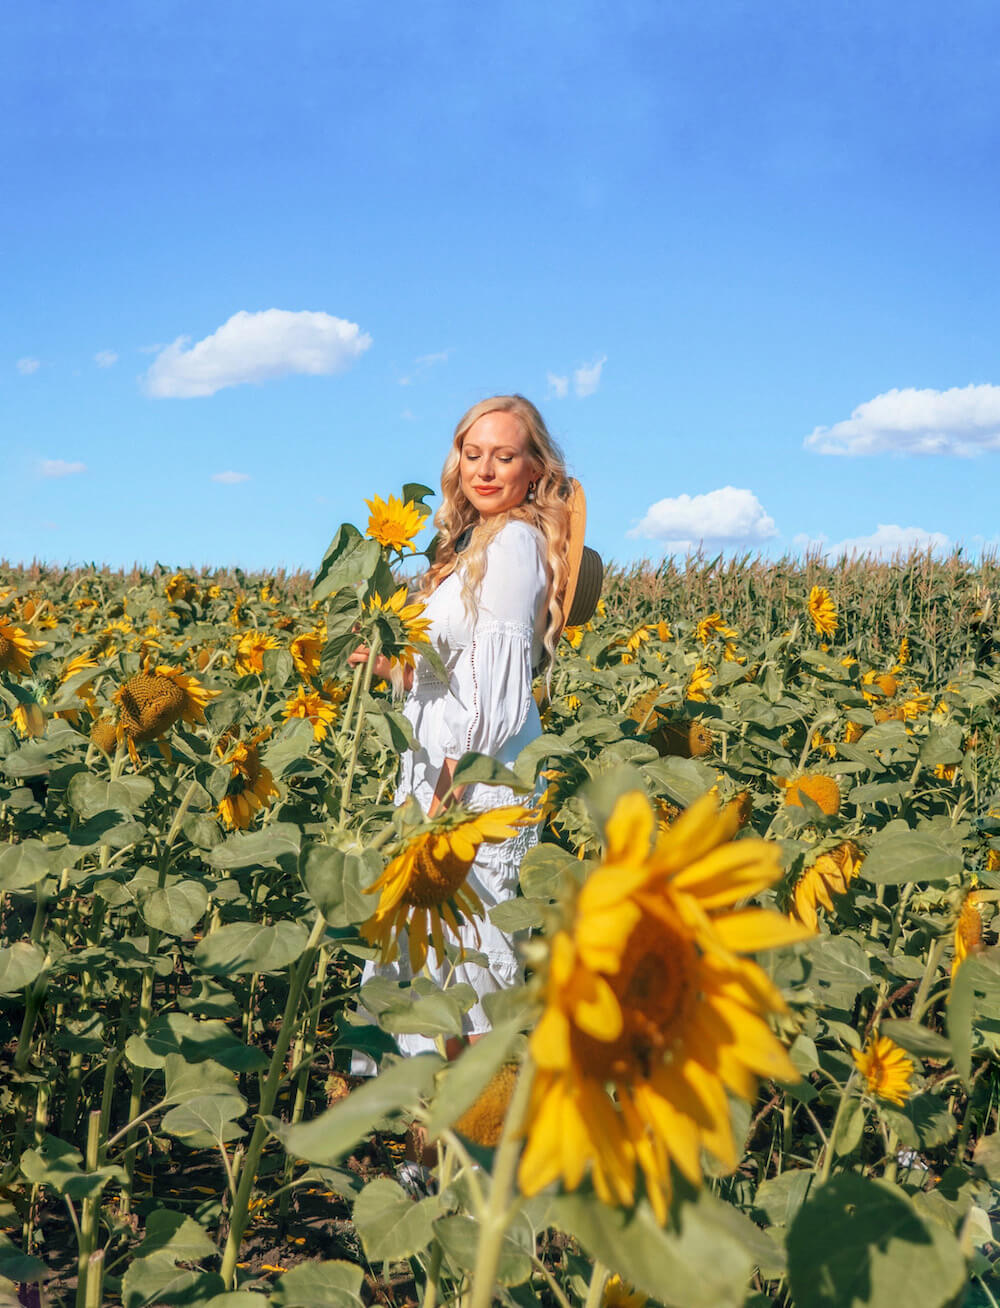 Looking for some fun things to do in Edmonton this summer? This guide includes all sorts of family friendly activities for you to try out! Whether you're looking for free things to do in Edmonton or you're ok with spending a little on activities, this guide has both free and paid ideas for you to check out this year. Picture here: Visit the sunflowers at the Edmonton Corn Maze